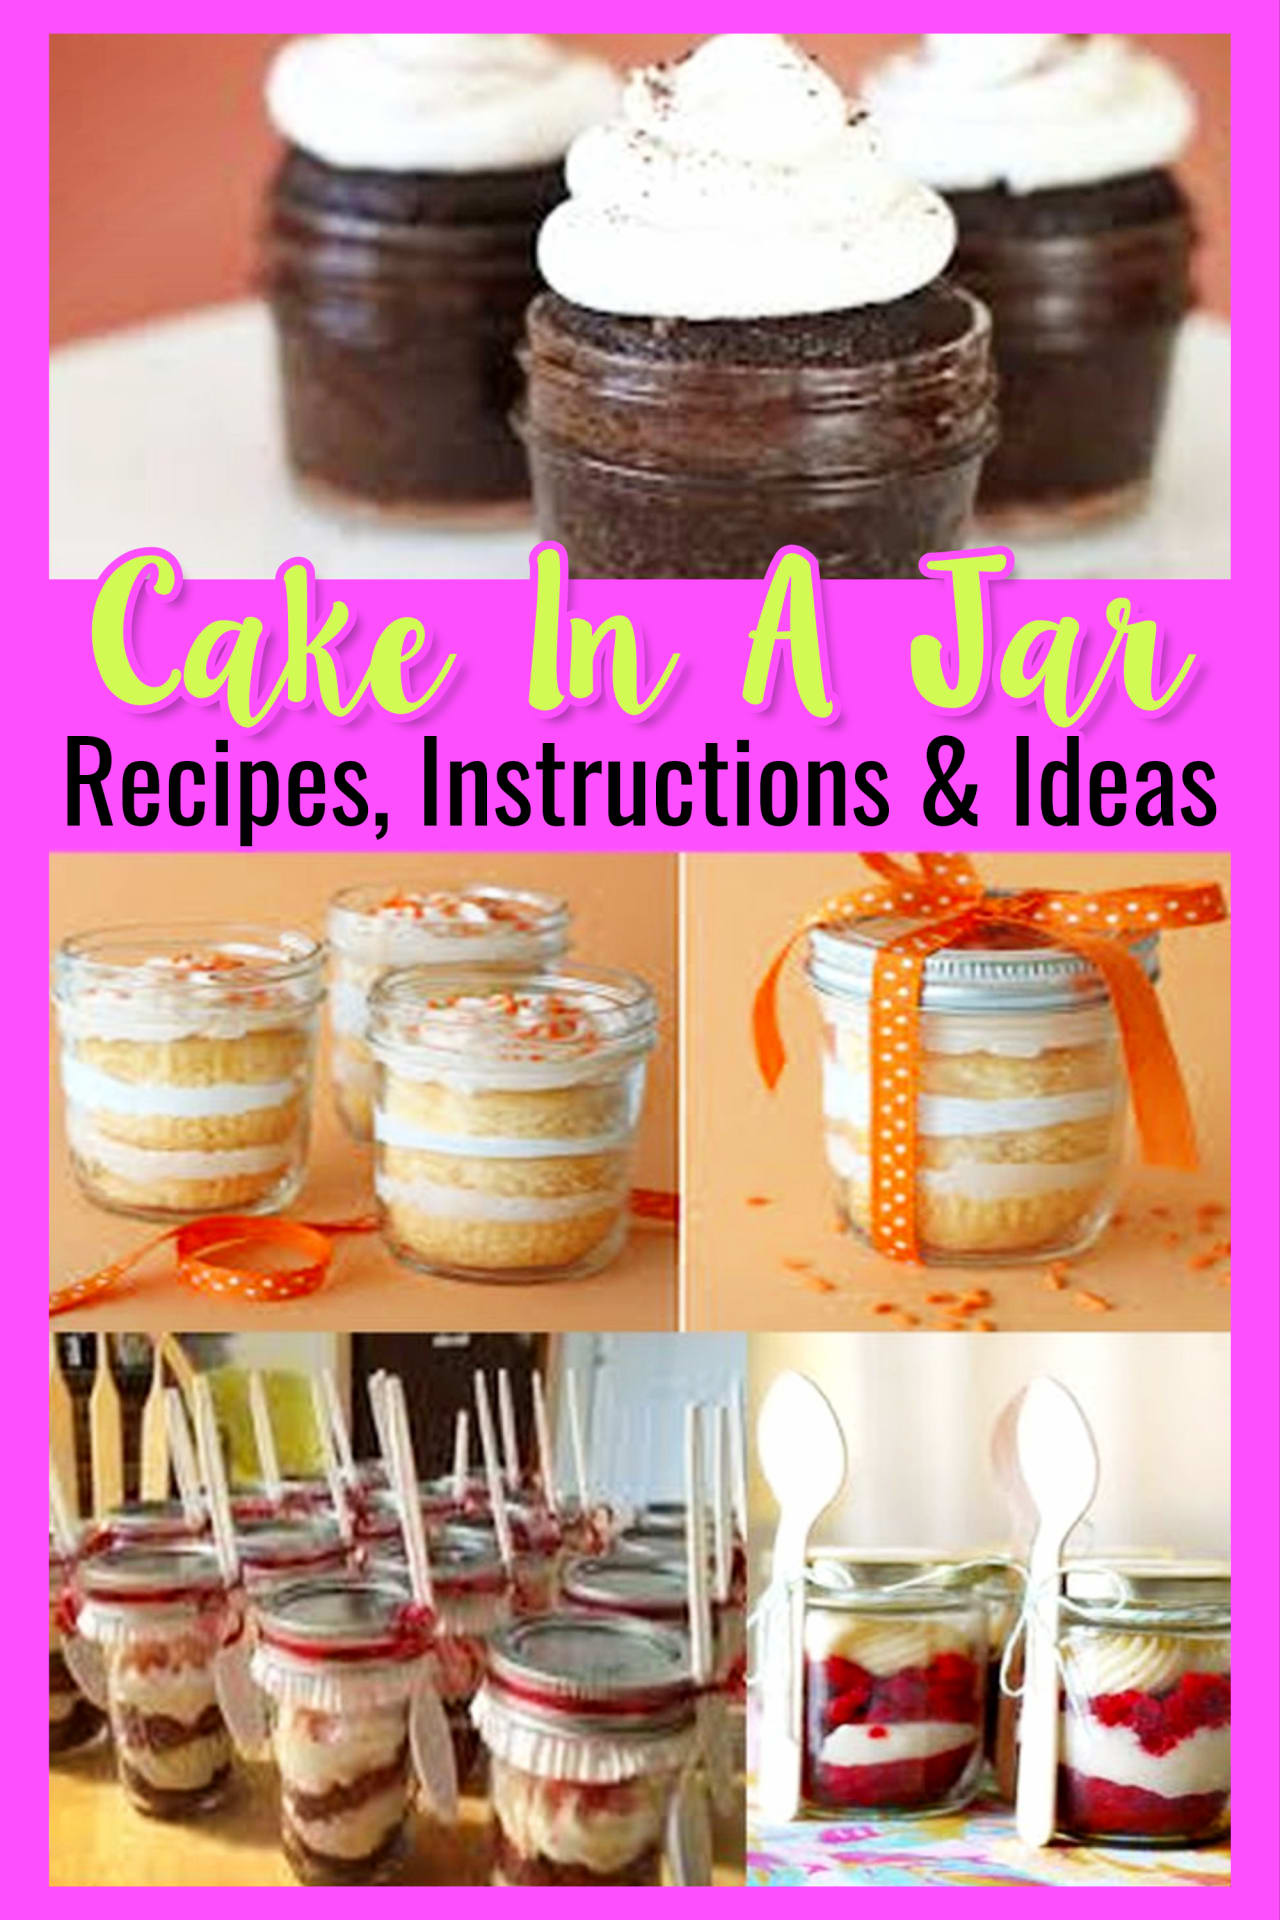 Cake in a Jar Recipes Ideas - How To Make Cake In a Jar (mason jar cupcakes) for deployment, as a gift, in a car package, for wedding, showers, Mothers Day.  Easy DIY cake in a jar ideas, recipes and instructions